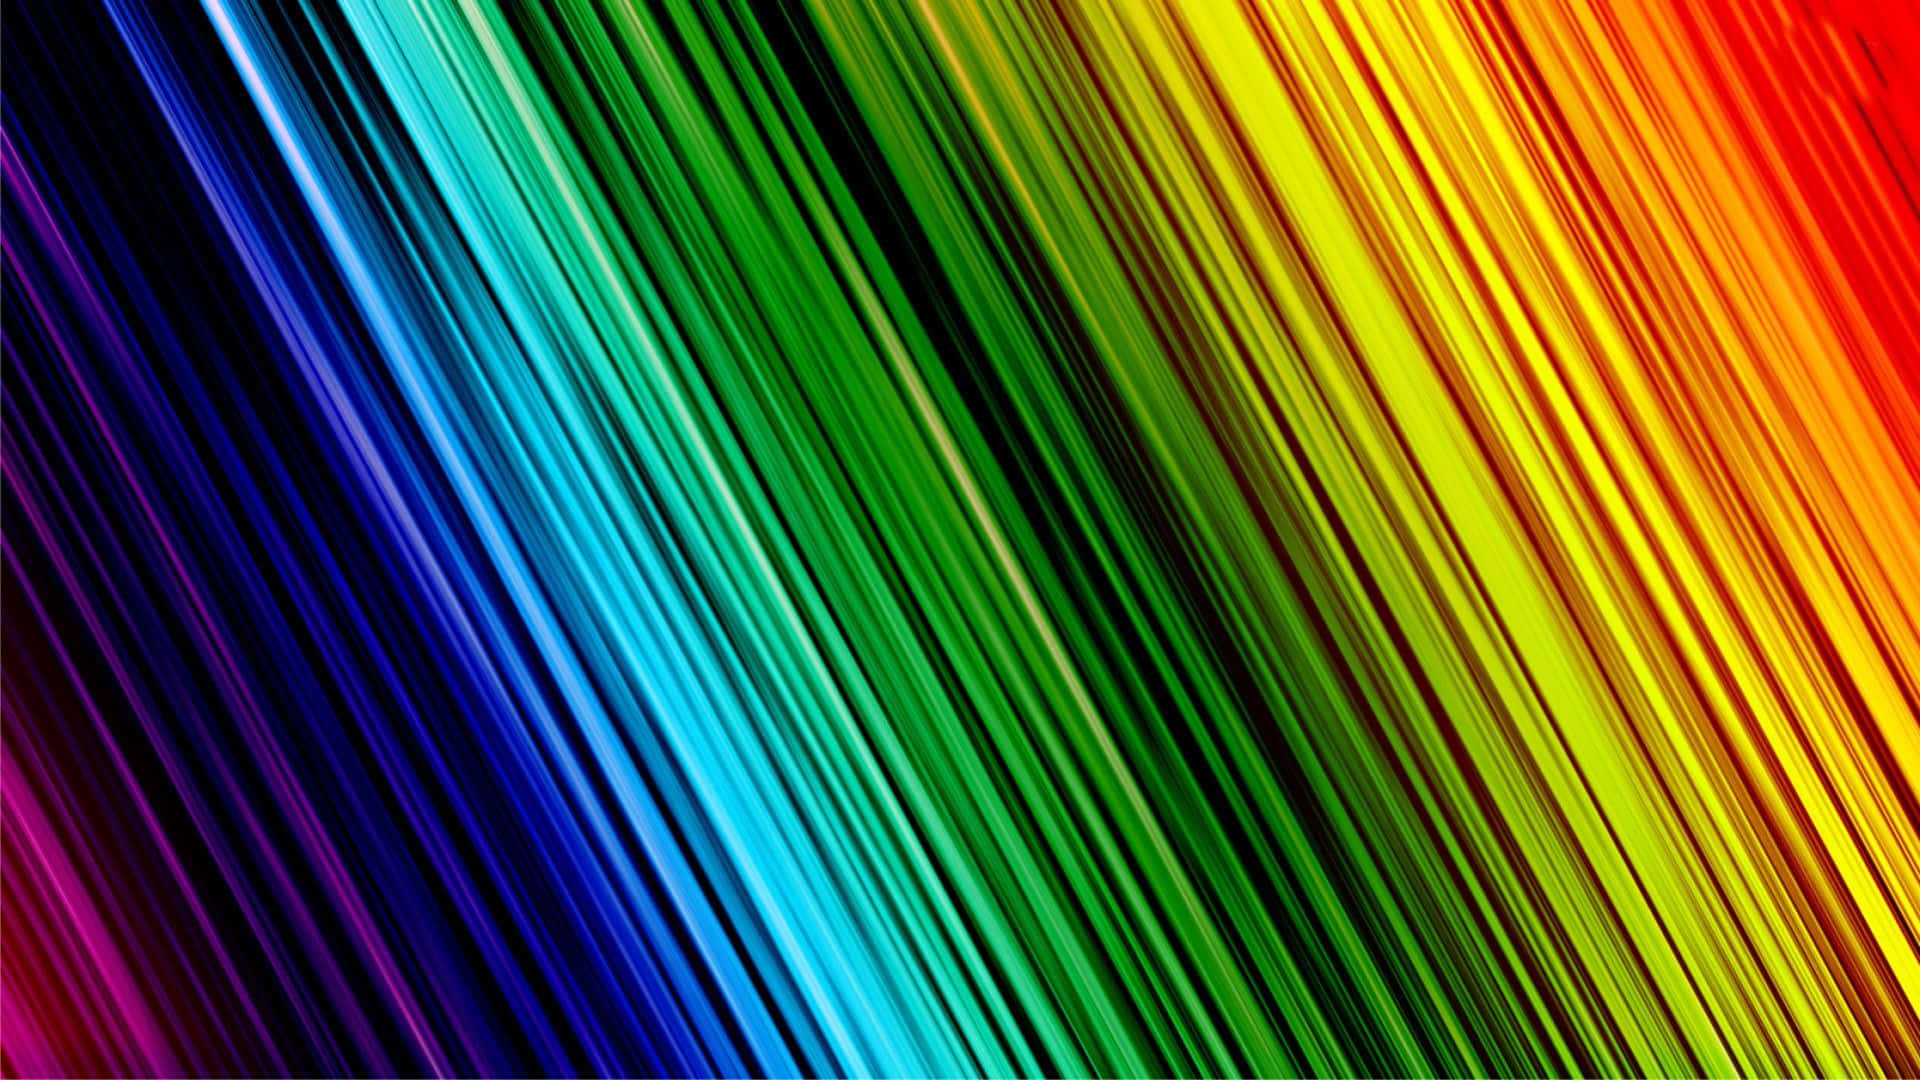 Take a journey down the rainbow with Neon Colors Wallpaper